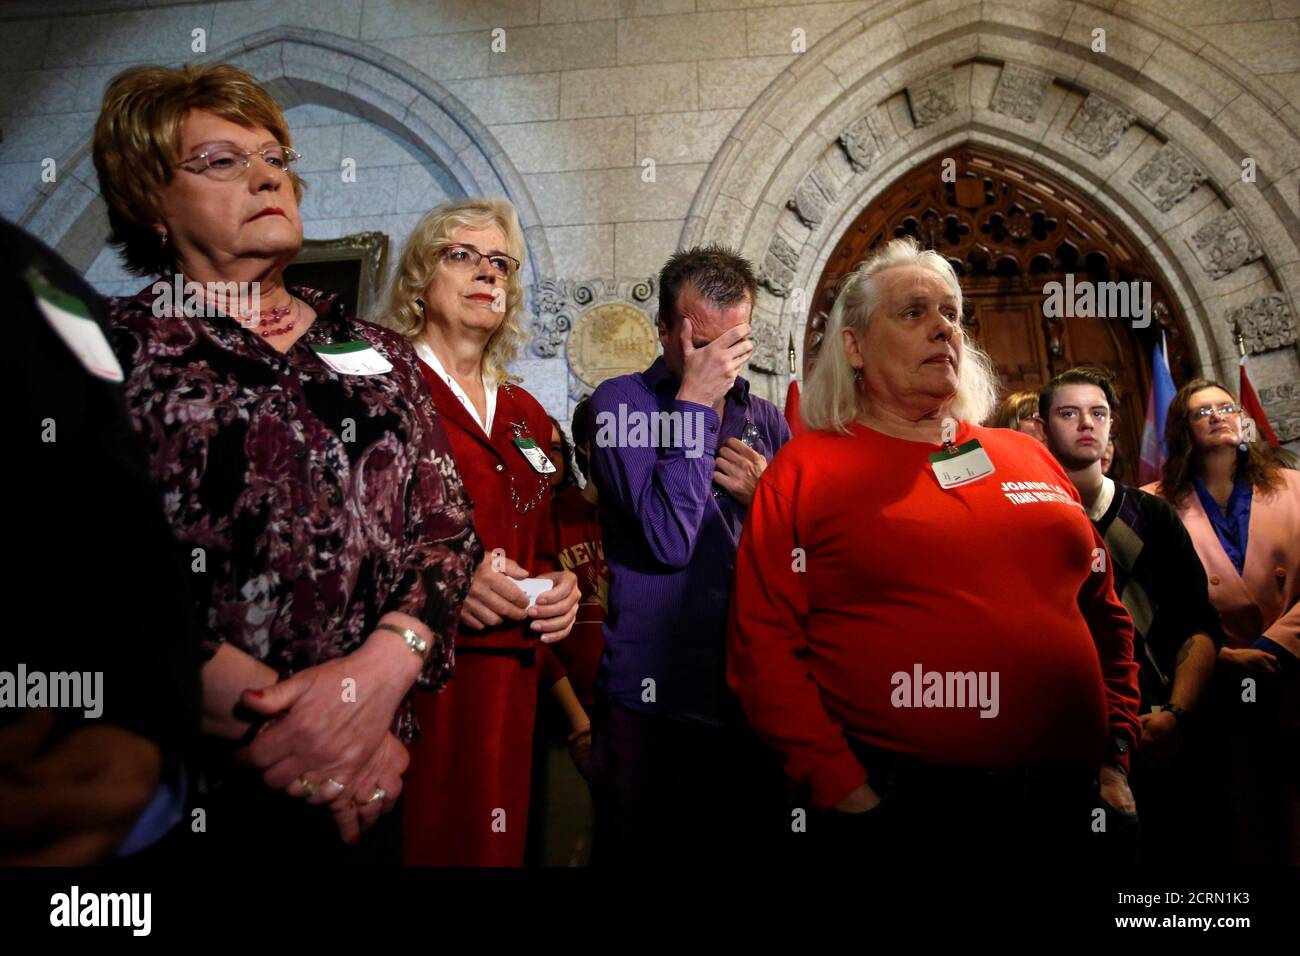 Supporters of the transgender community listen during a news conference announcing that Canada will introduce legislation to protect transgender people from discrimination and hate crimes, on Parliament Hill in Ottawa, Canada, May 17, 2016. REUTERS/Chris Wattie Stock Photo